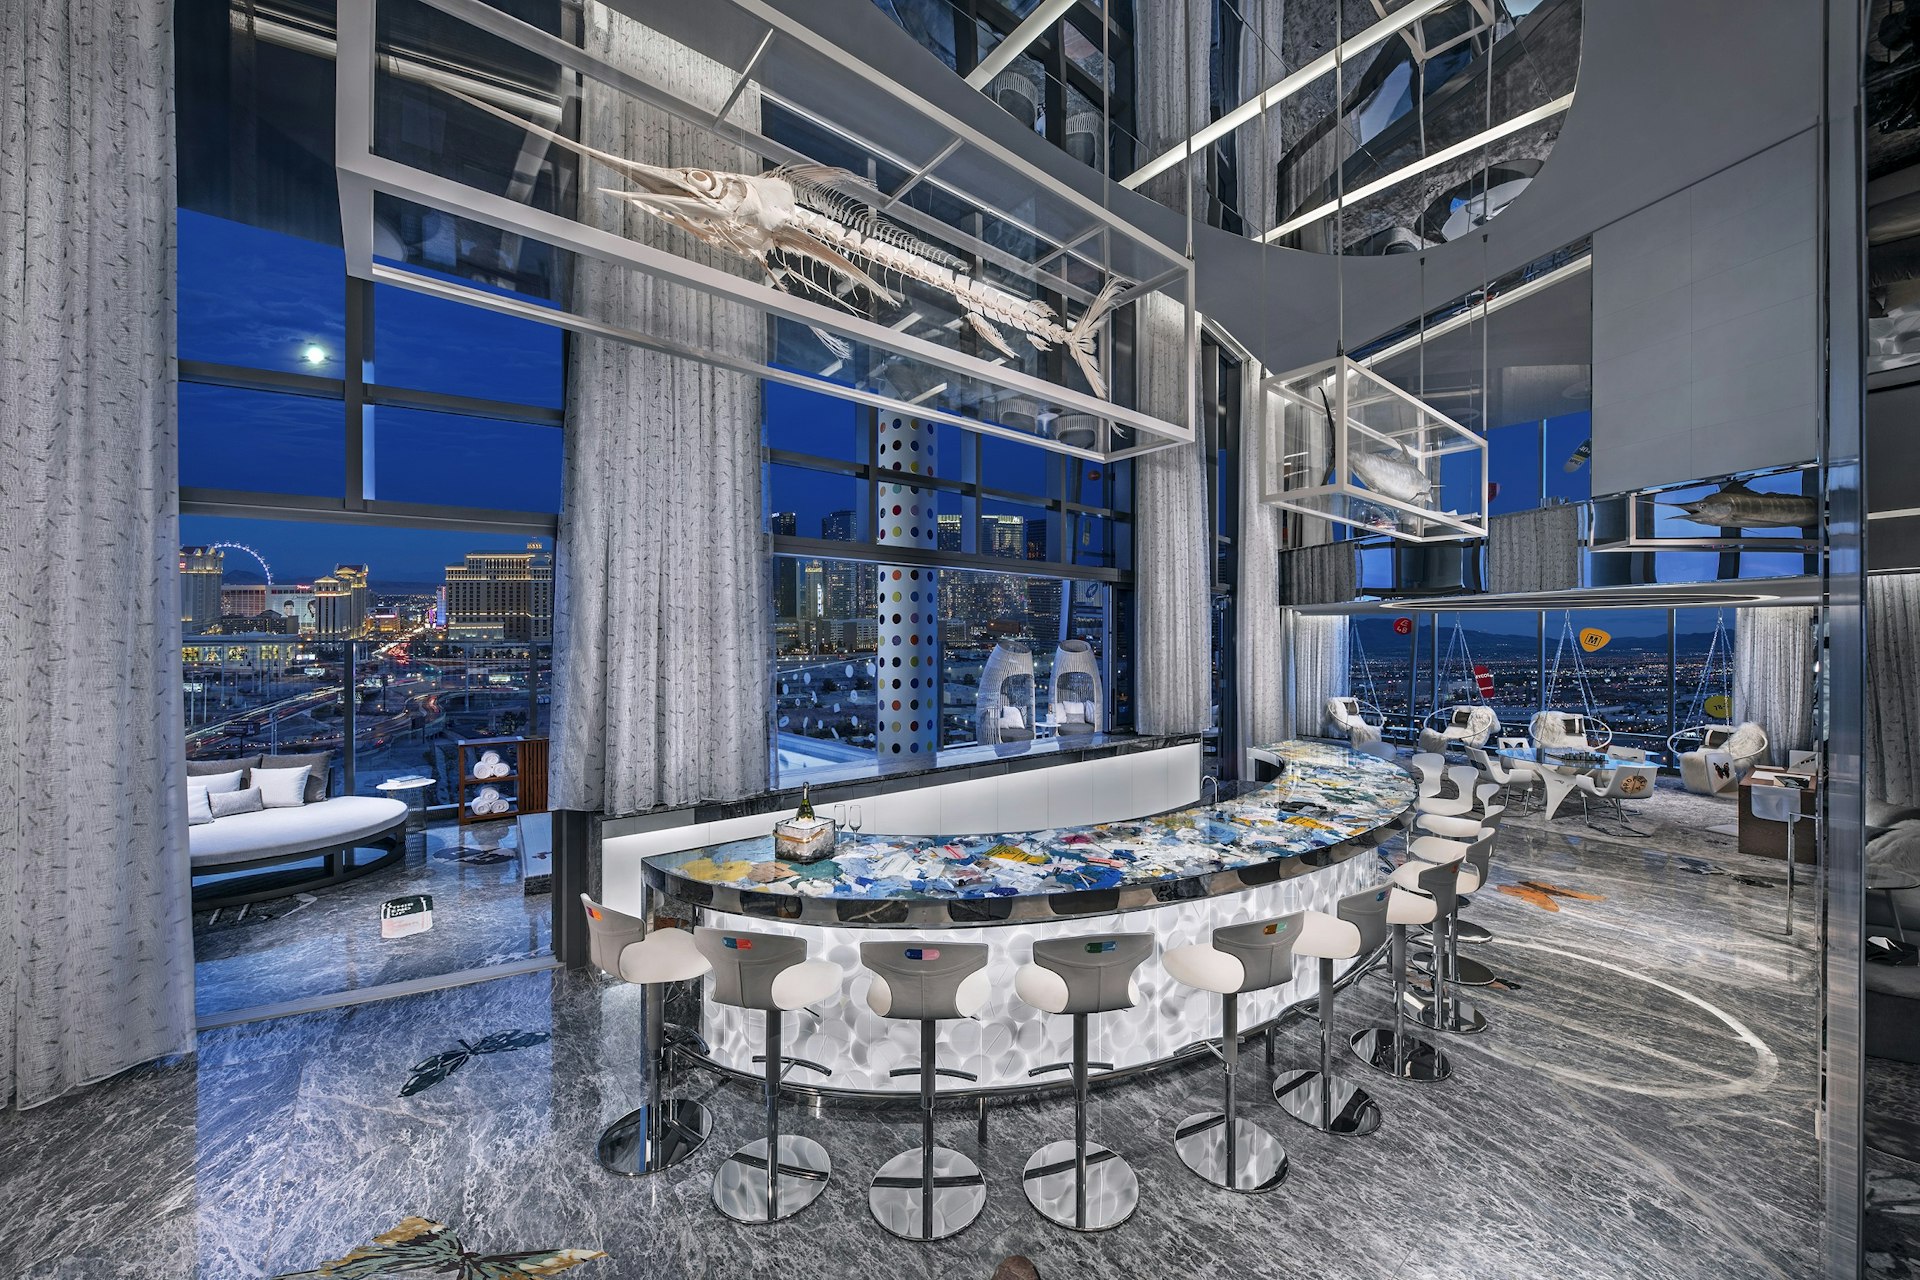 A large apartment space with floor-to-ceiling glass windows allowing a view of Las Vegas. The room is grey and white with splashes of colour, often in the shape of butterflies. A bar forms a half circle in the centre of the room, with ten empty stools around it